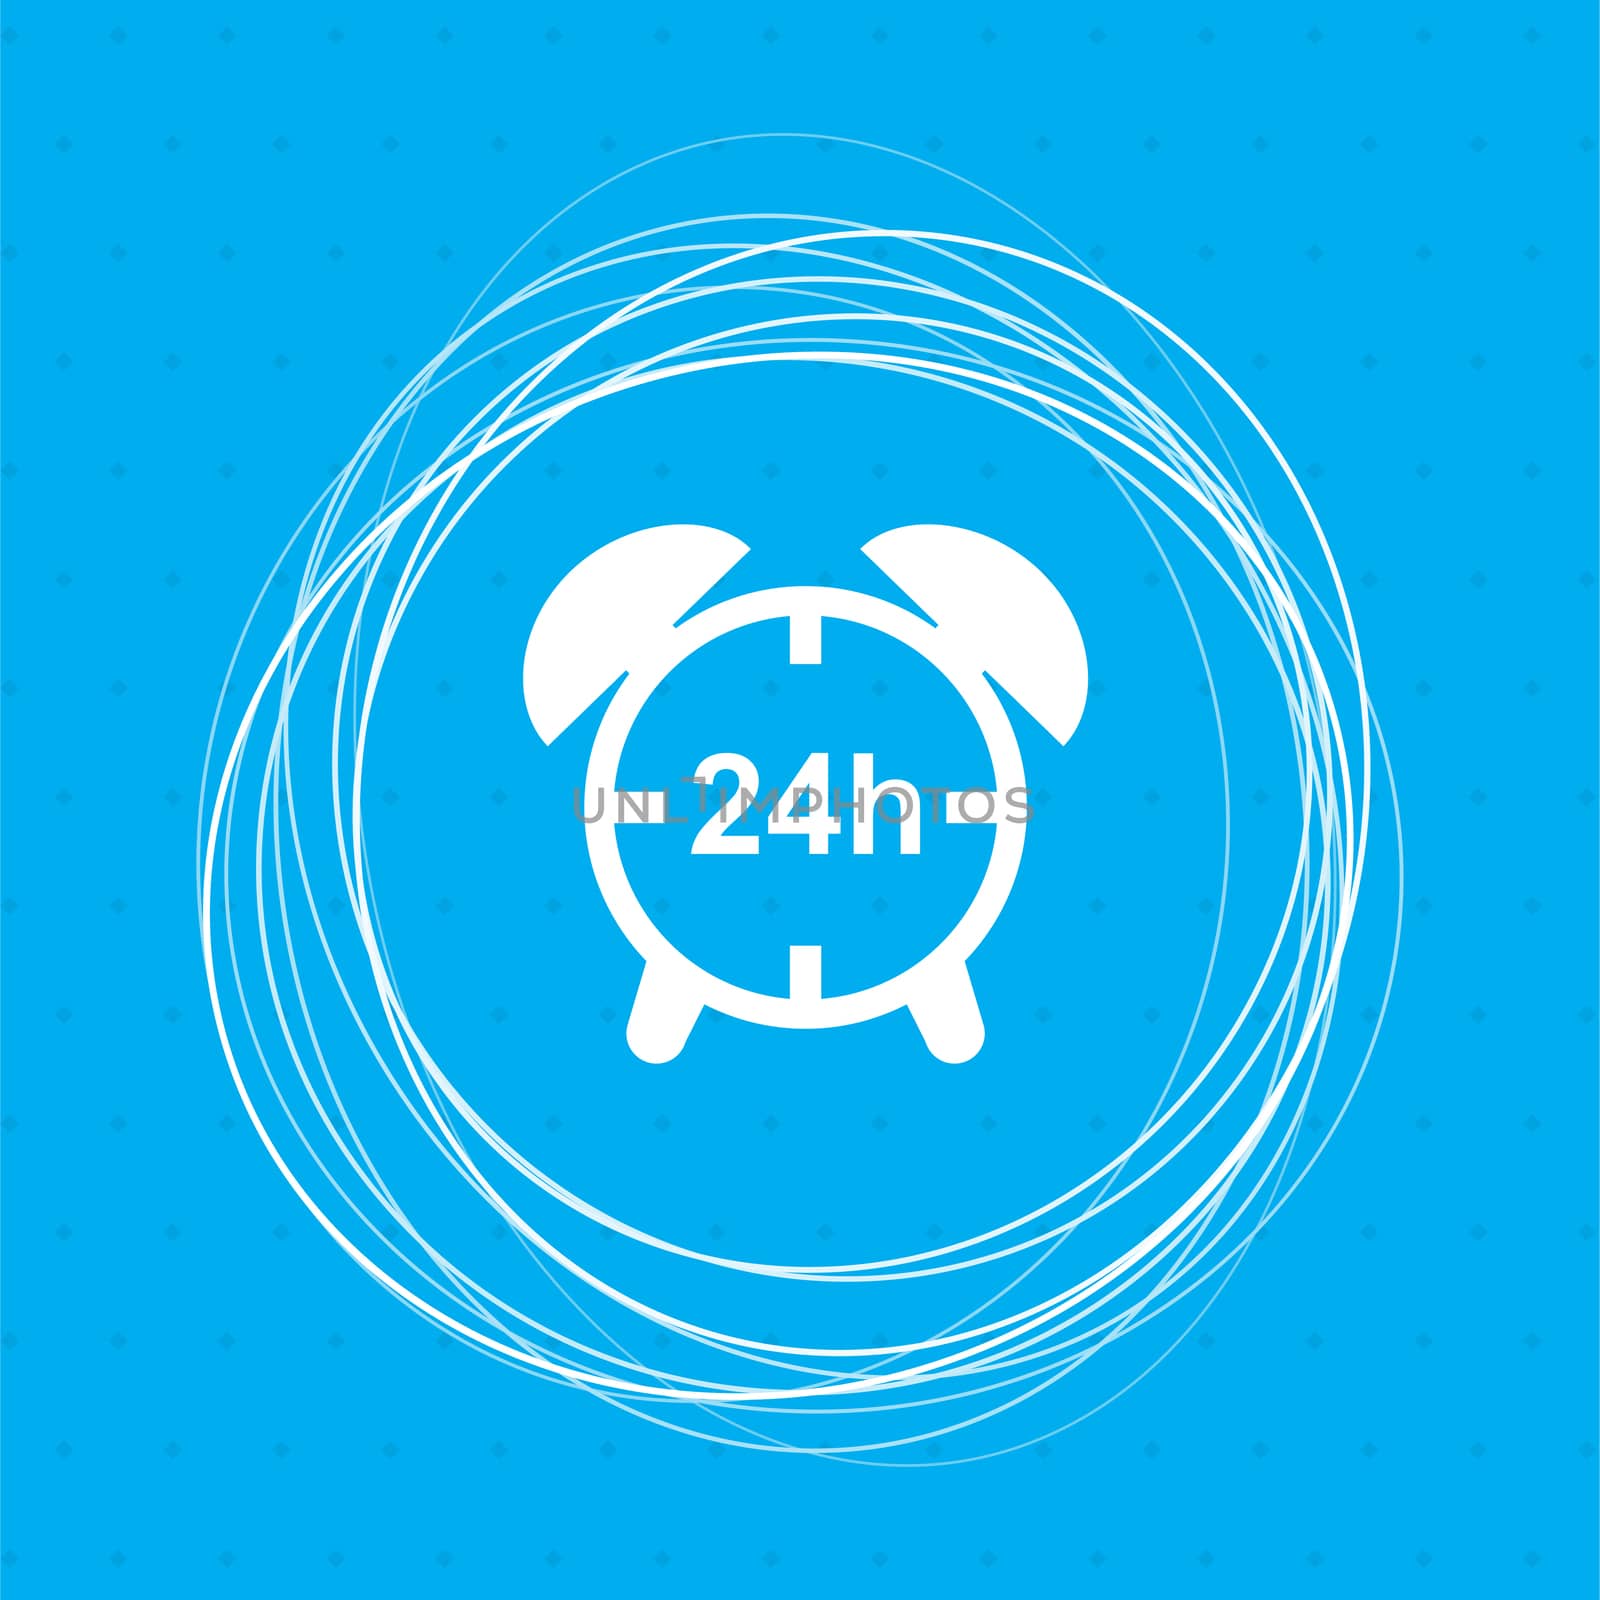 alarm clock icon on a blue background with abstract circles around and place for your text.  by Adamchuk